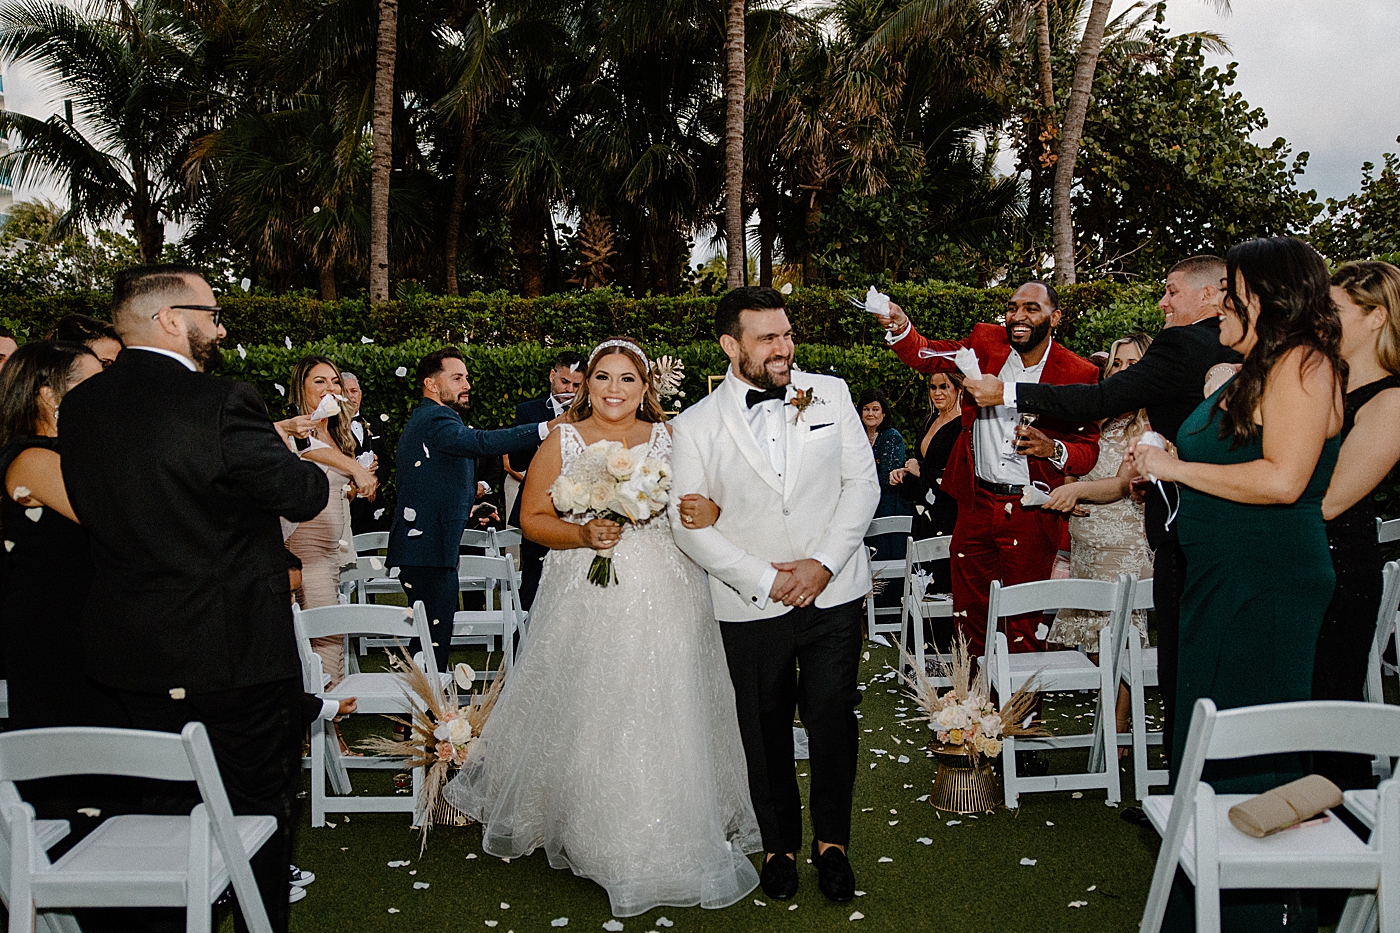 Bride and Groom exiting together with attendees throwing flower petals Modern Elegant Wedding at The W South Beach captured by South Florida Wedding Photographer Erika Tuesta Photography